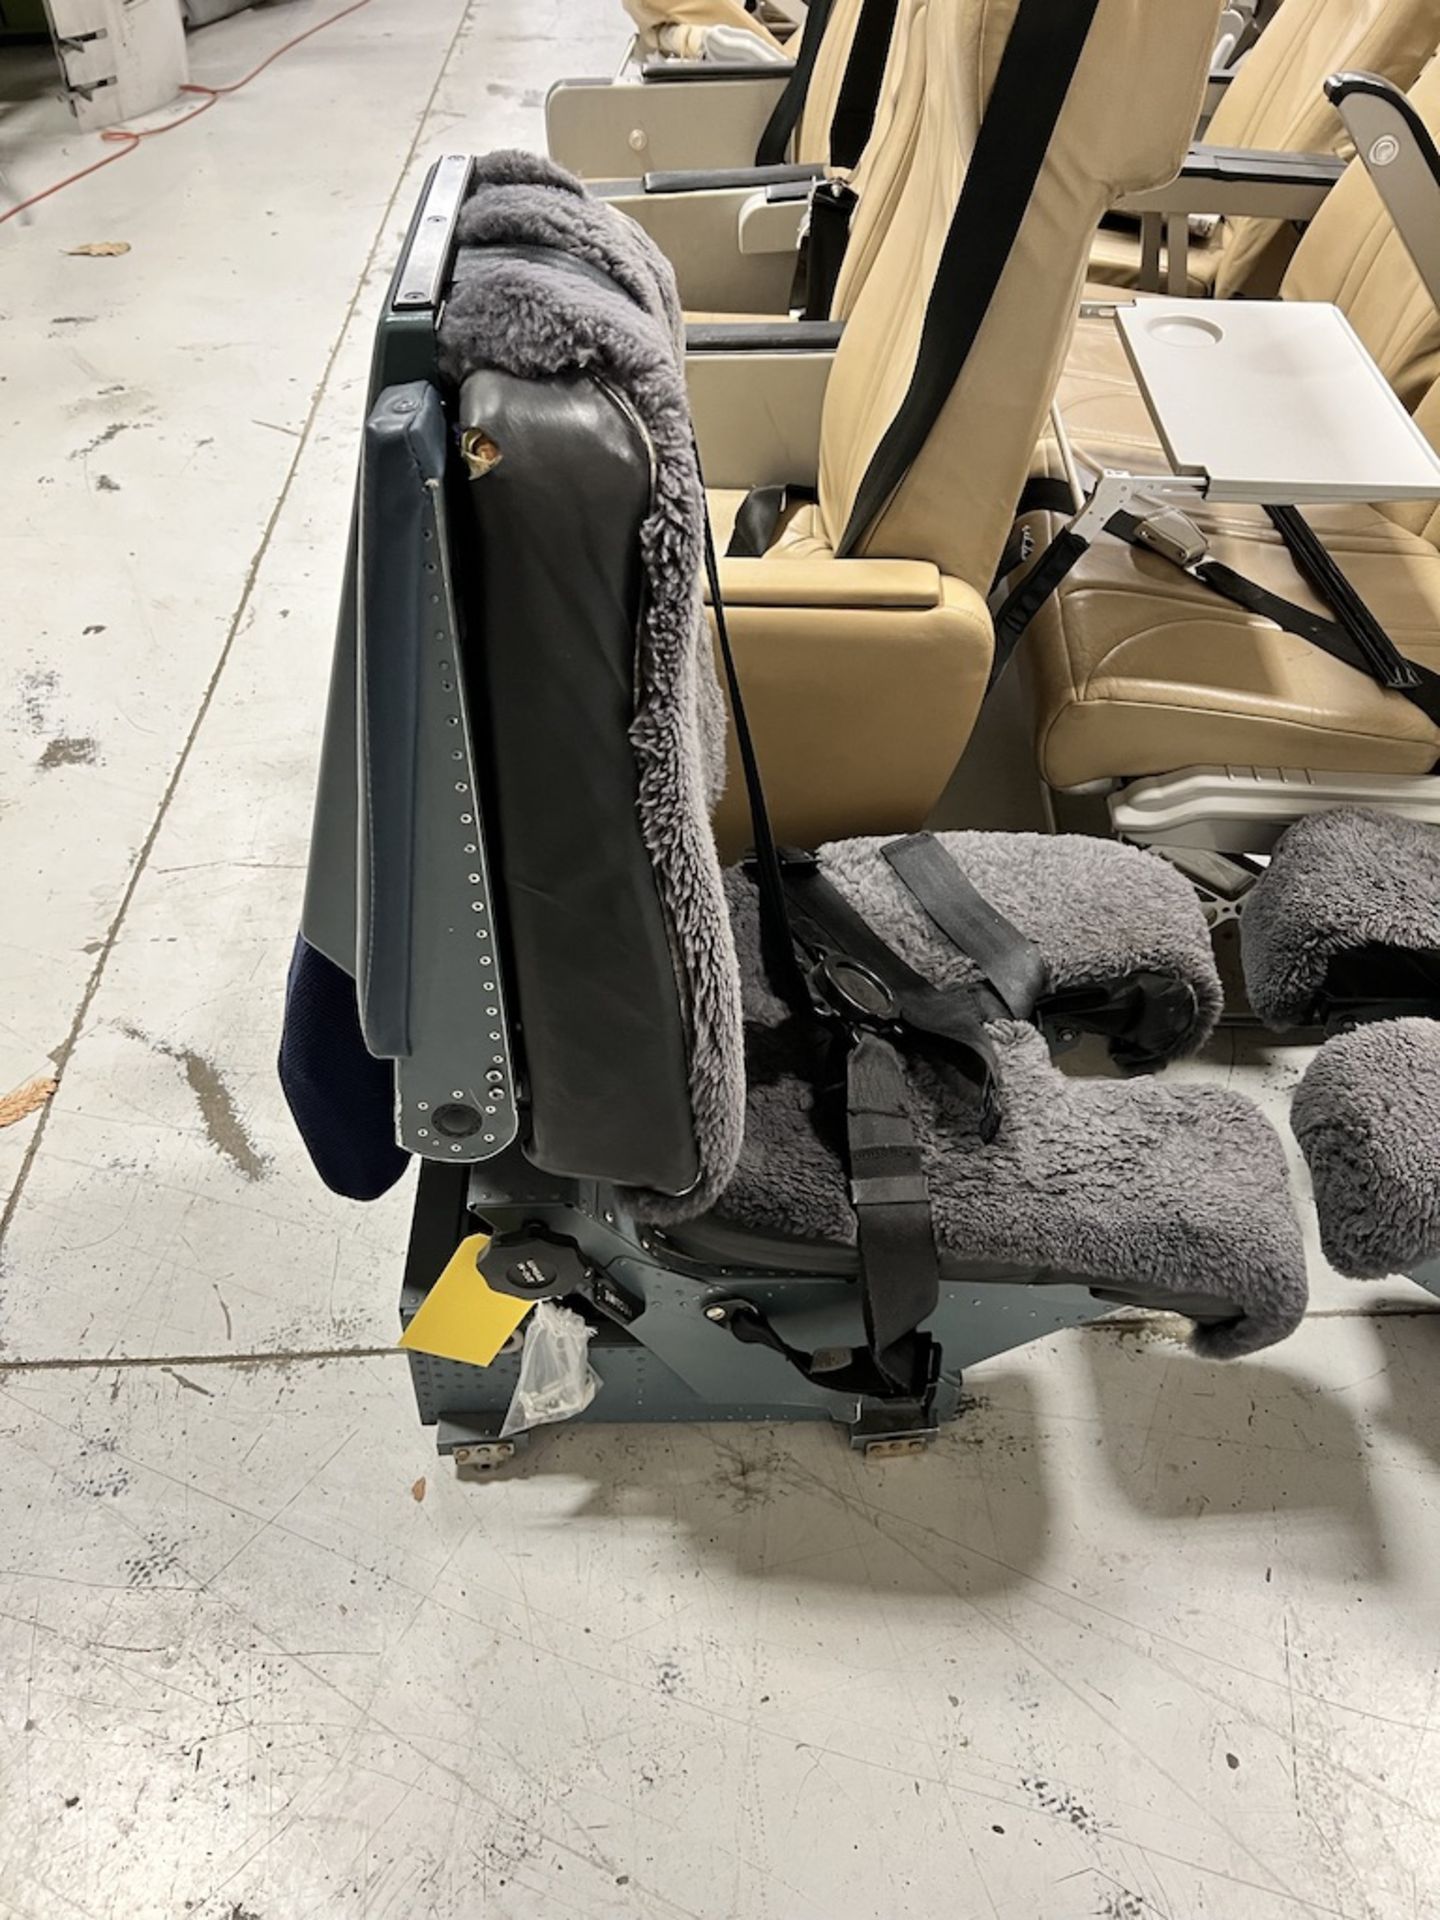 LOT OF: (1) PILOT SEAT AND (1) CO-PILOT SEAT. - Image 9 of 10